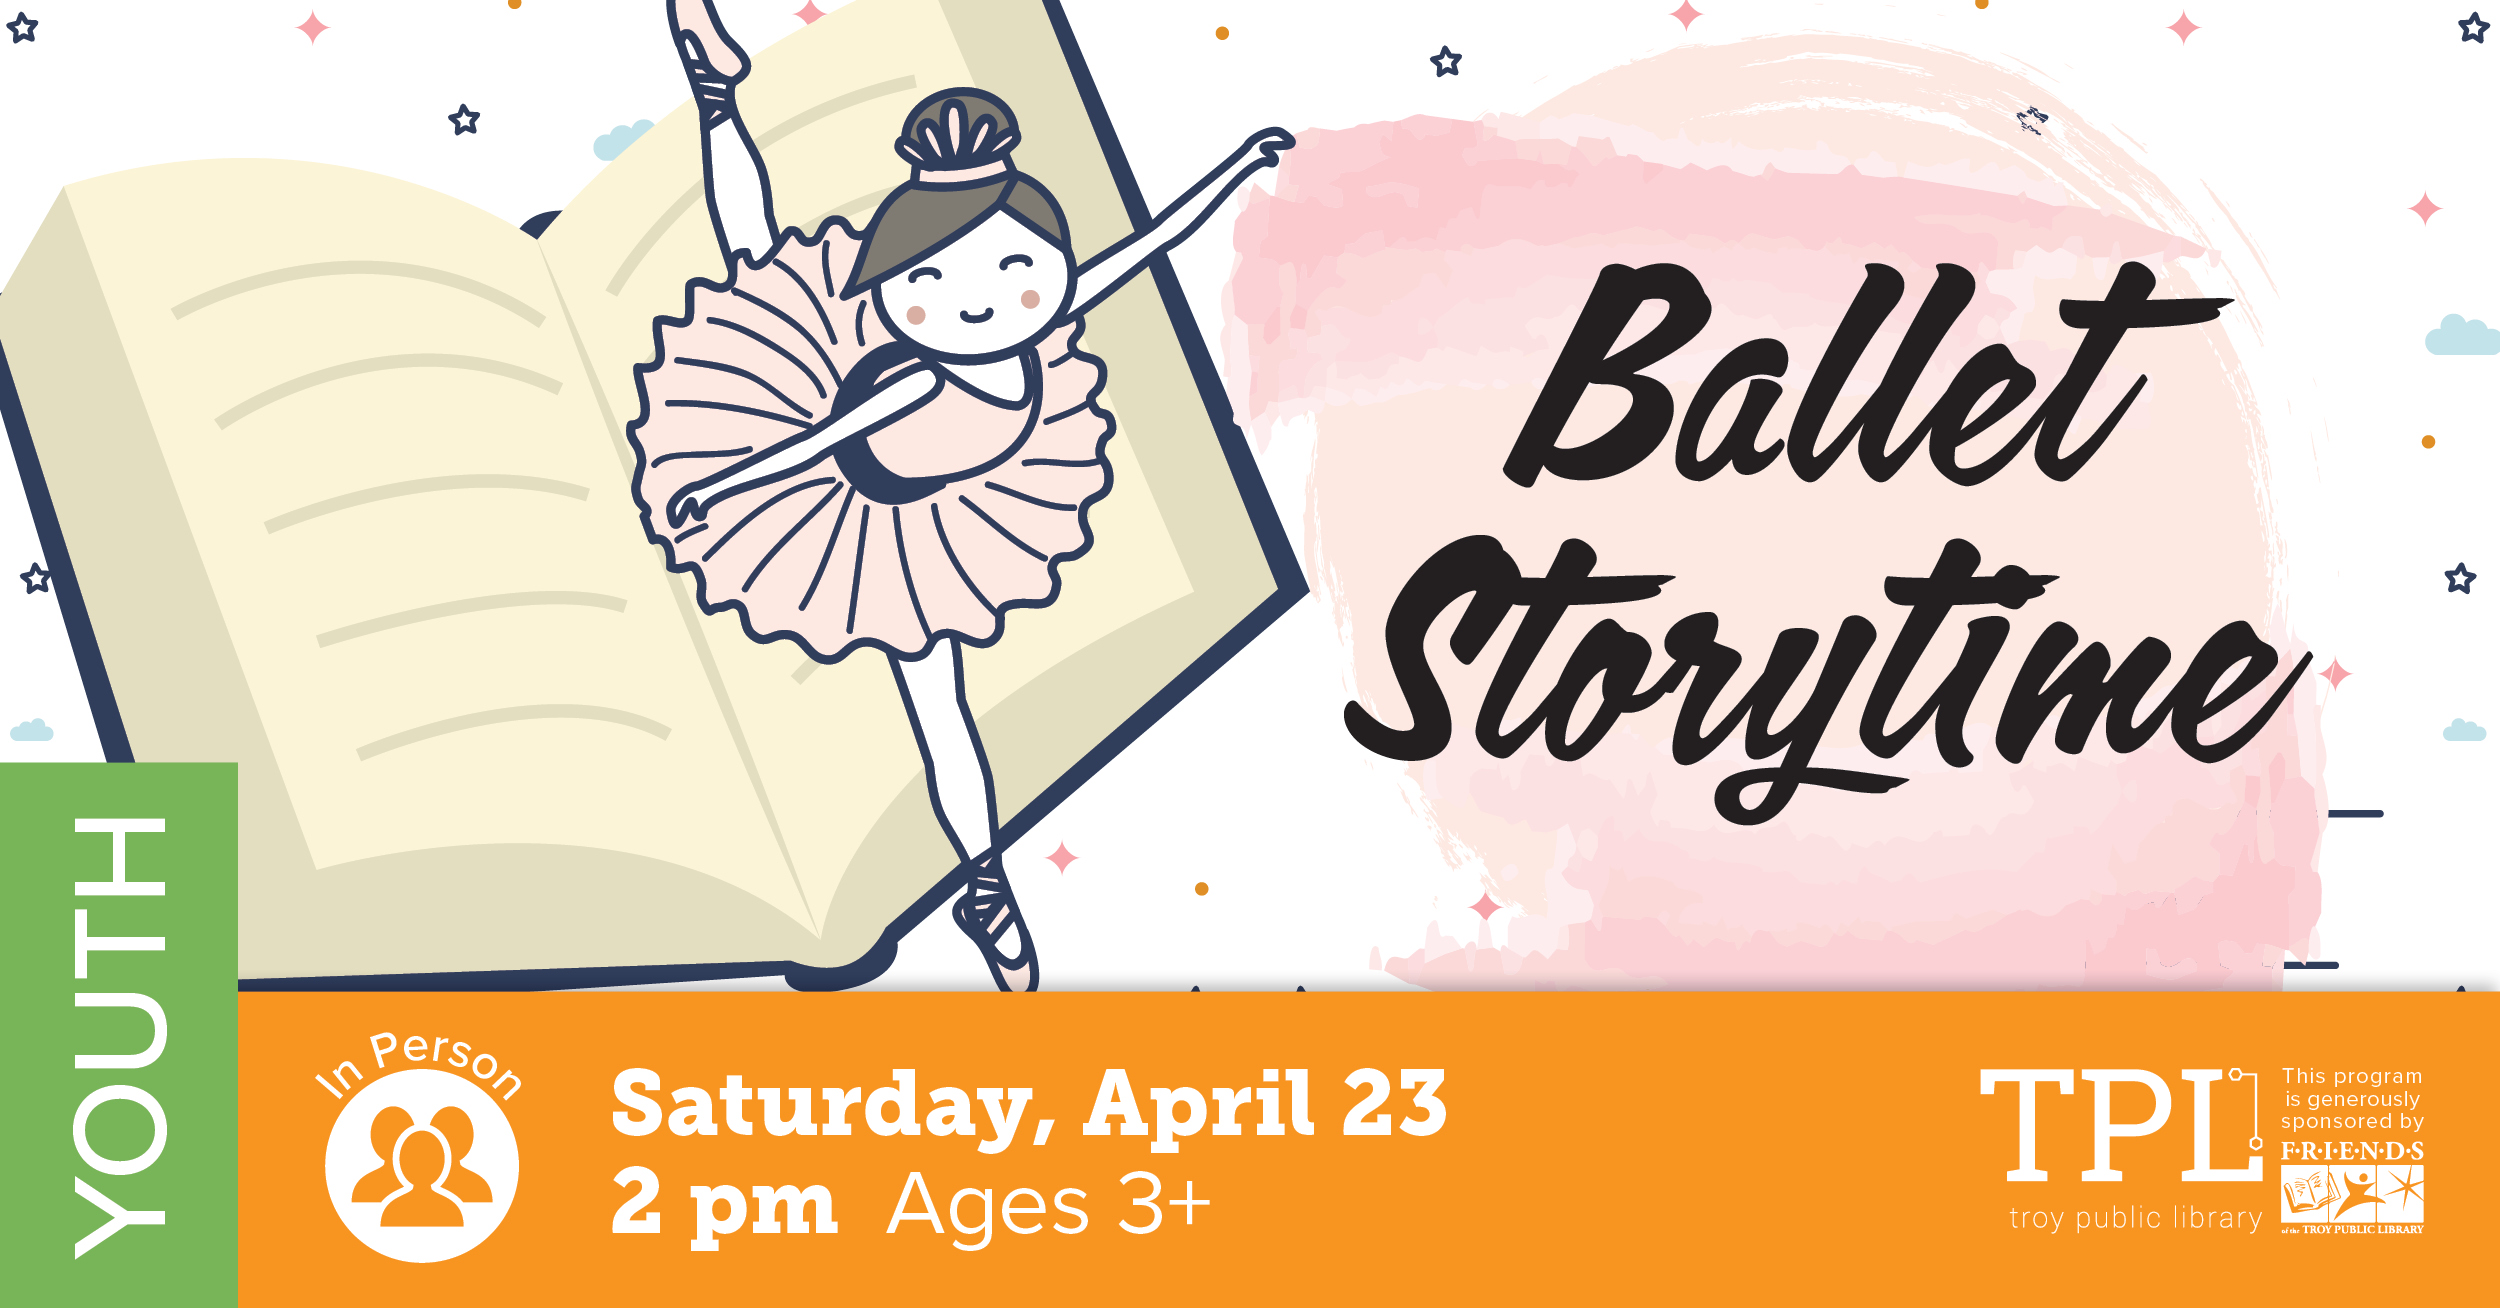 Ballet Storytime. In person program on Saturday, April 23rd at 2 pm for ages 3 and above. Sponsored by the Friends of the Troy Public Library.